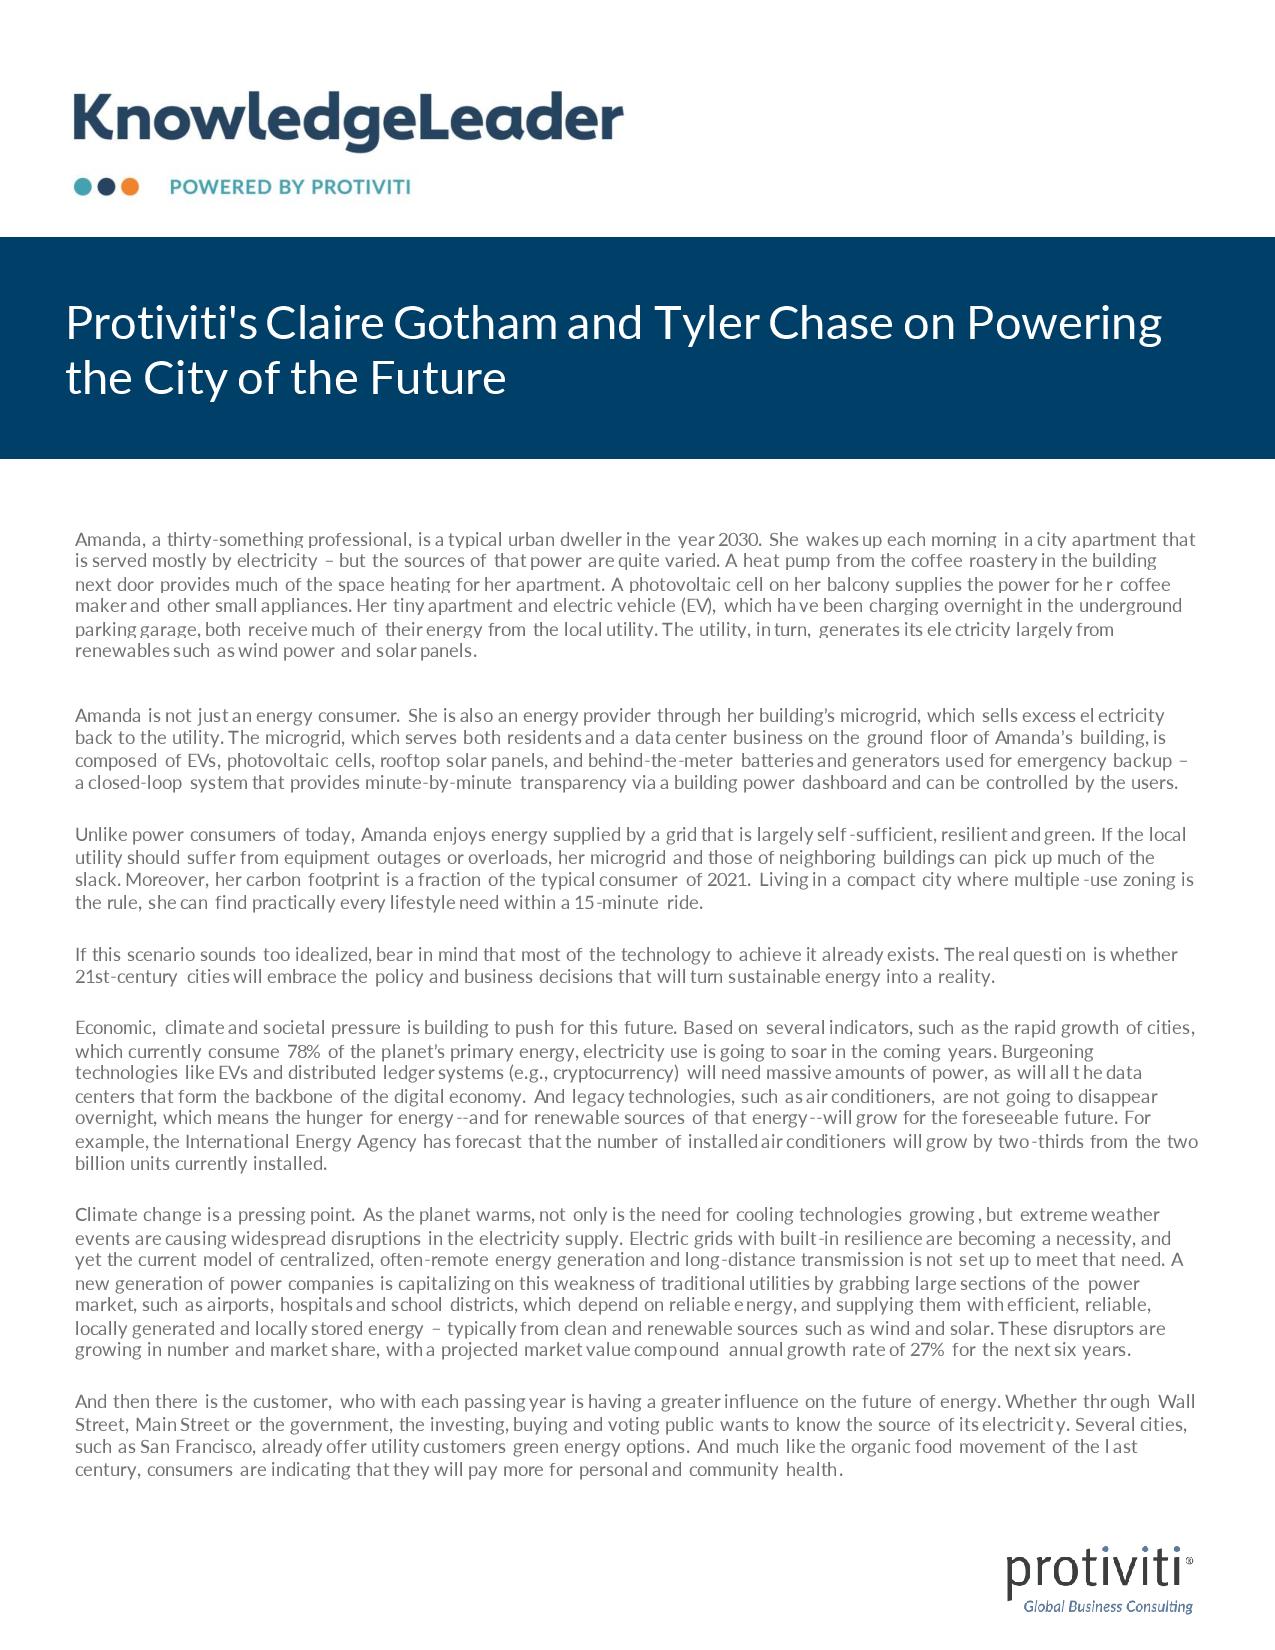 Screenshot of the page of Protiviti s Claire Gotham and Tyler Chase on Powering the City of the Future